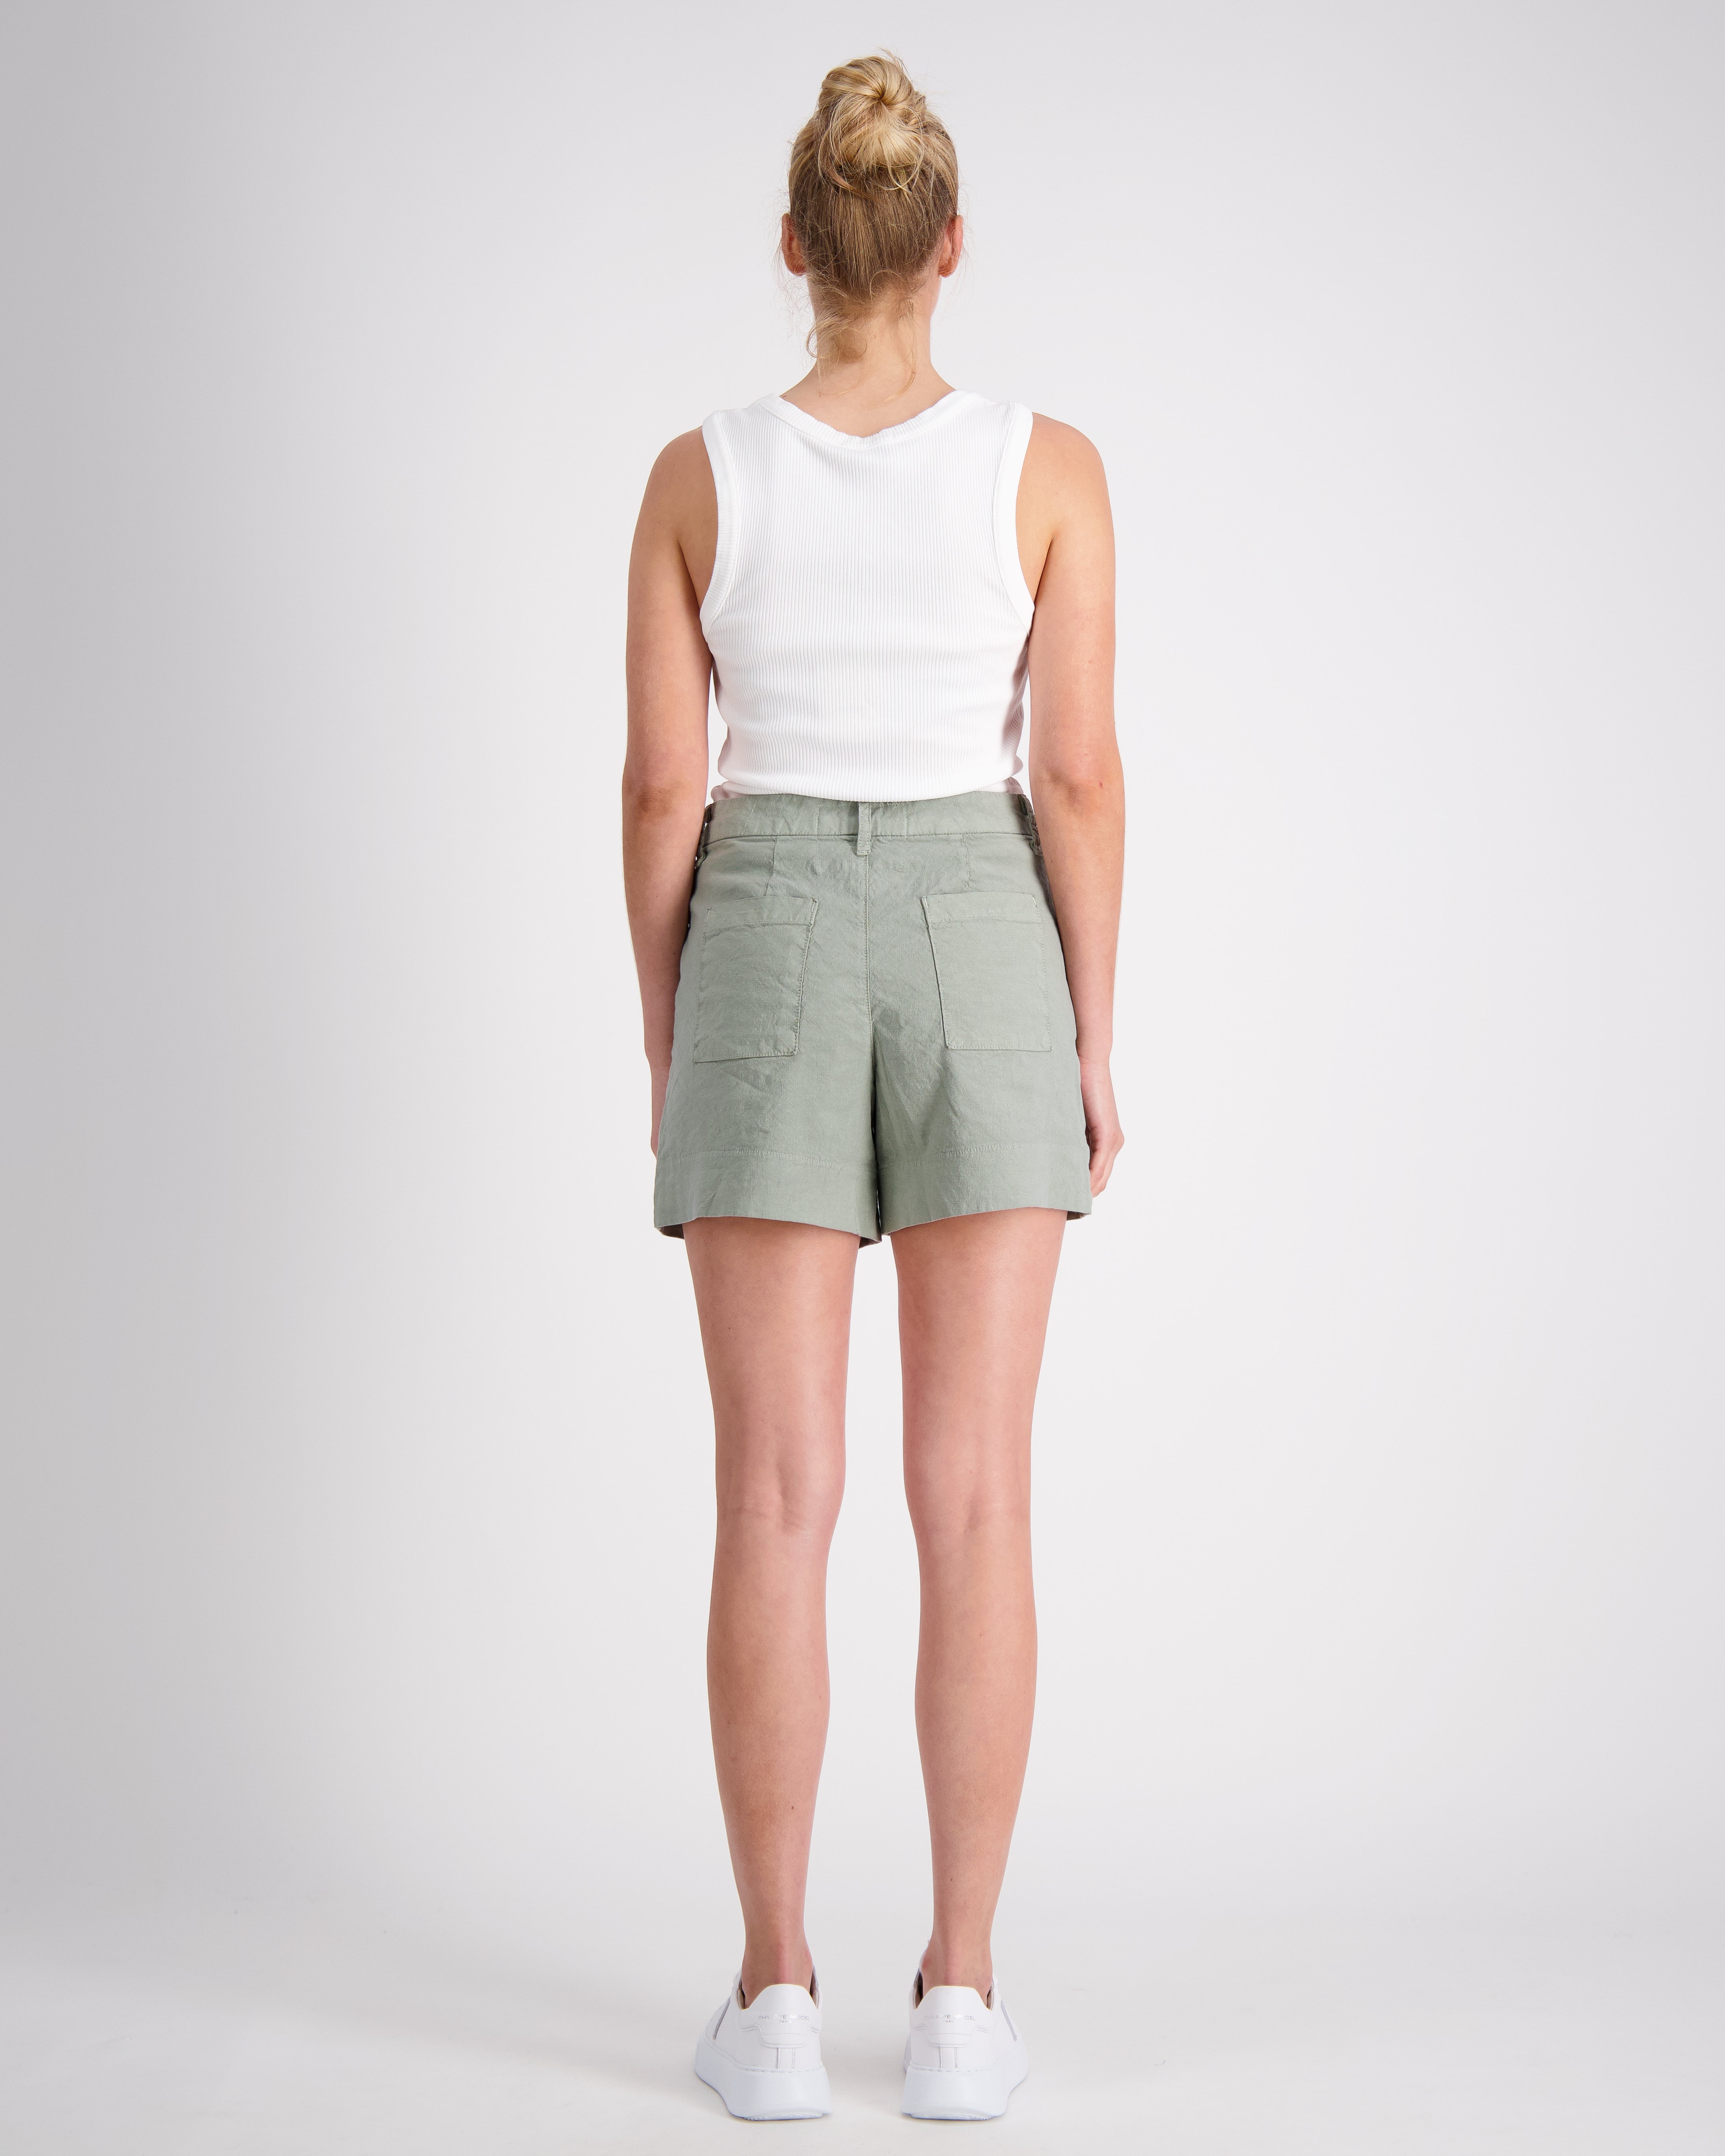 Waterford Tailored Shorts in Sage